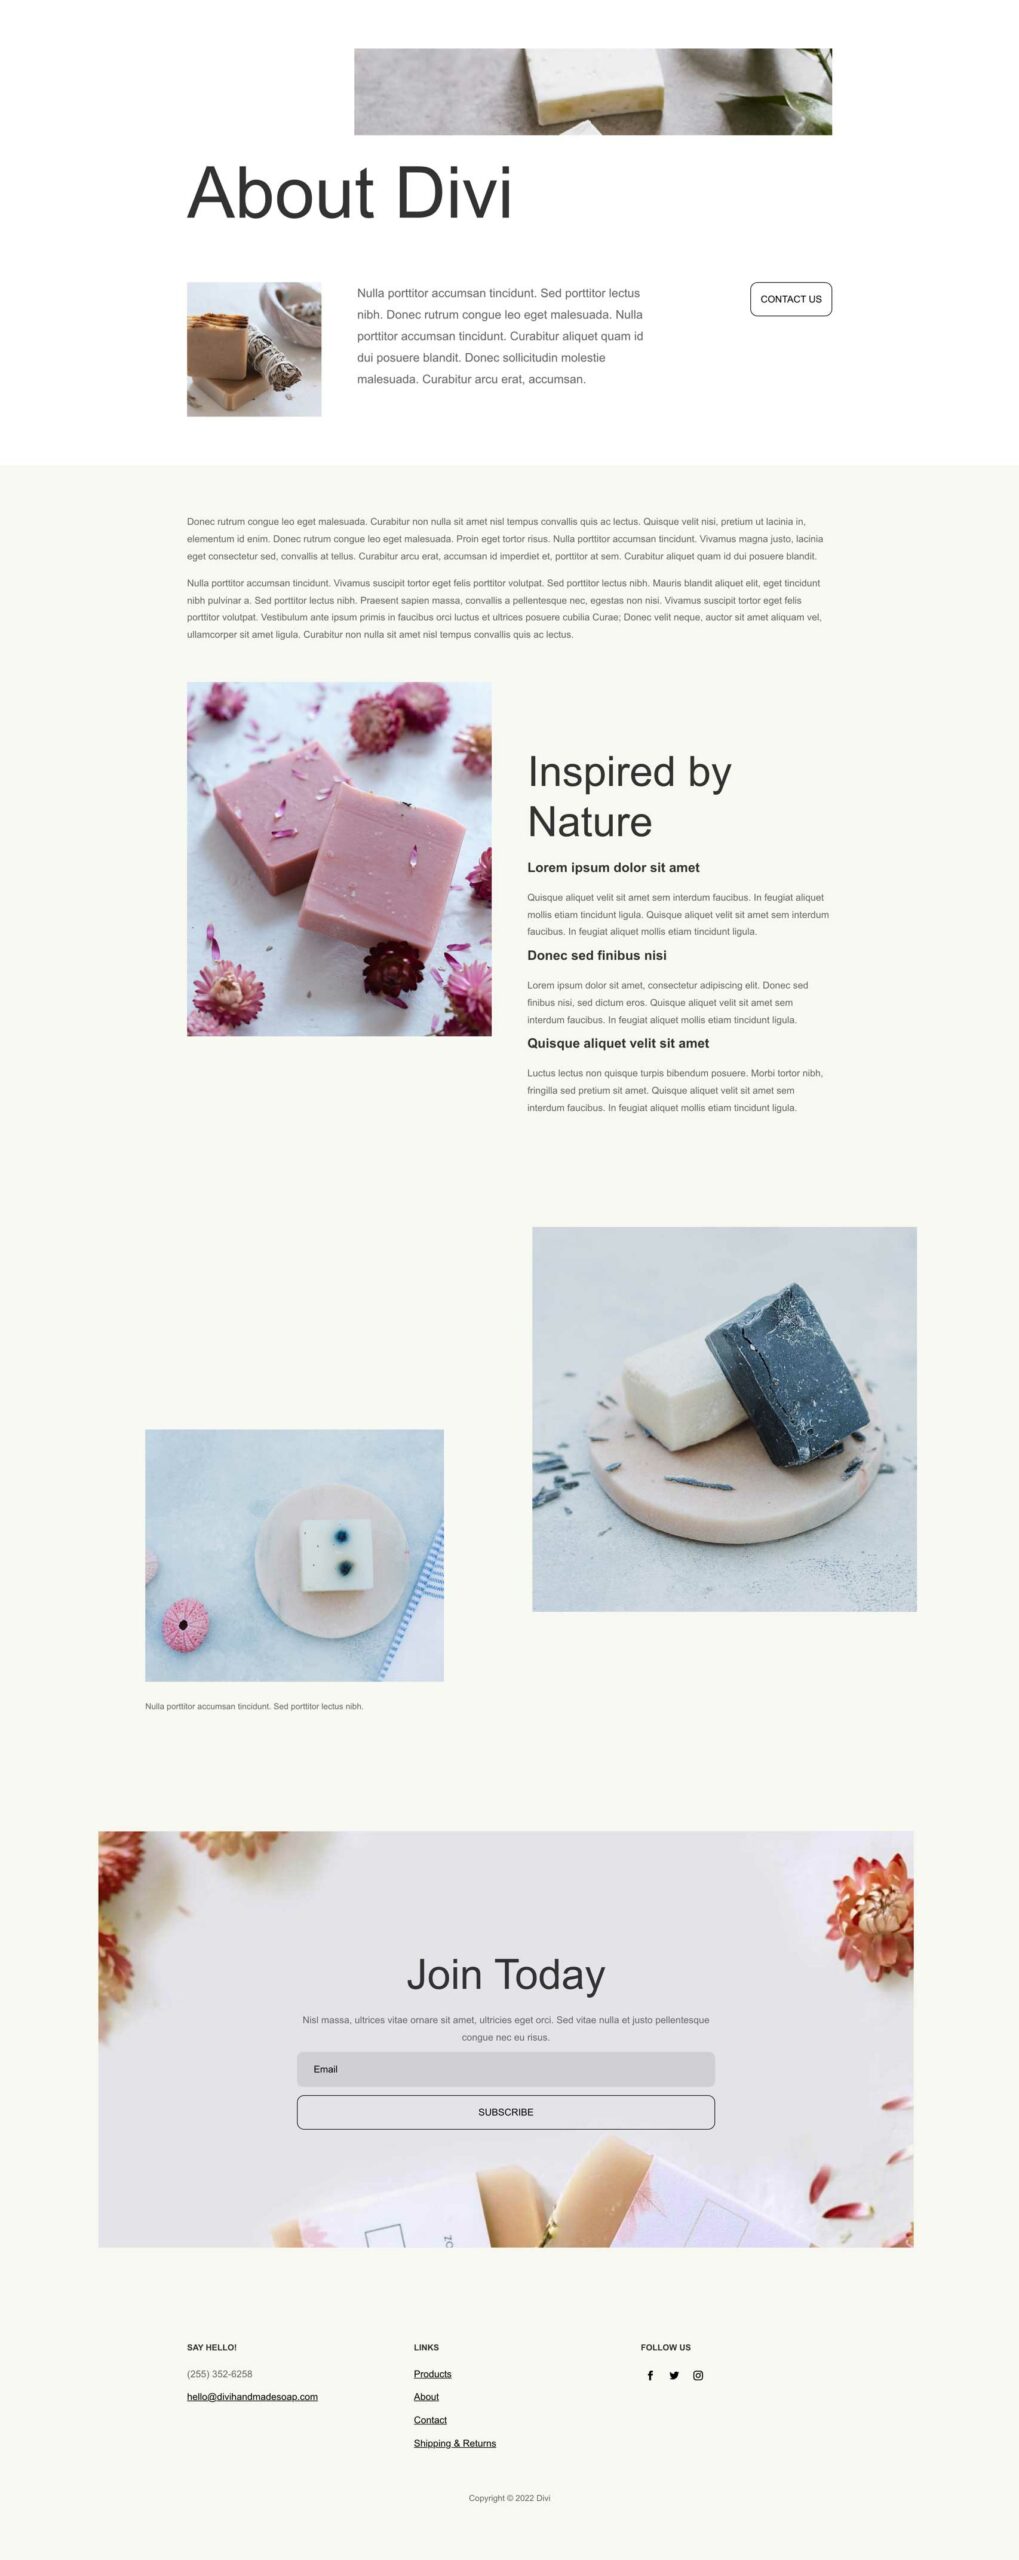 Handmade Soap Layout Pack for Divi